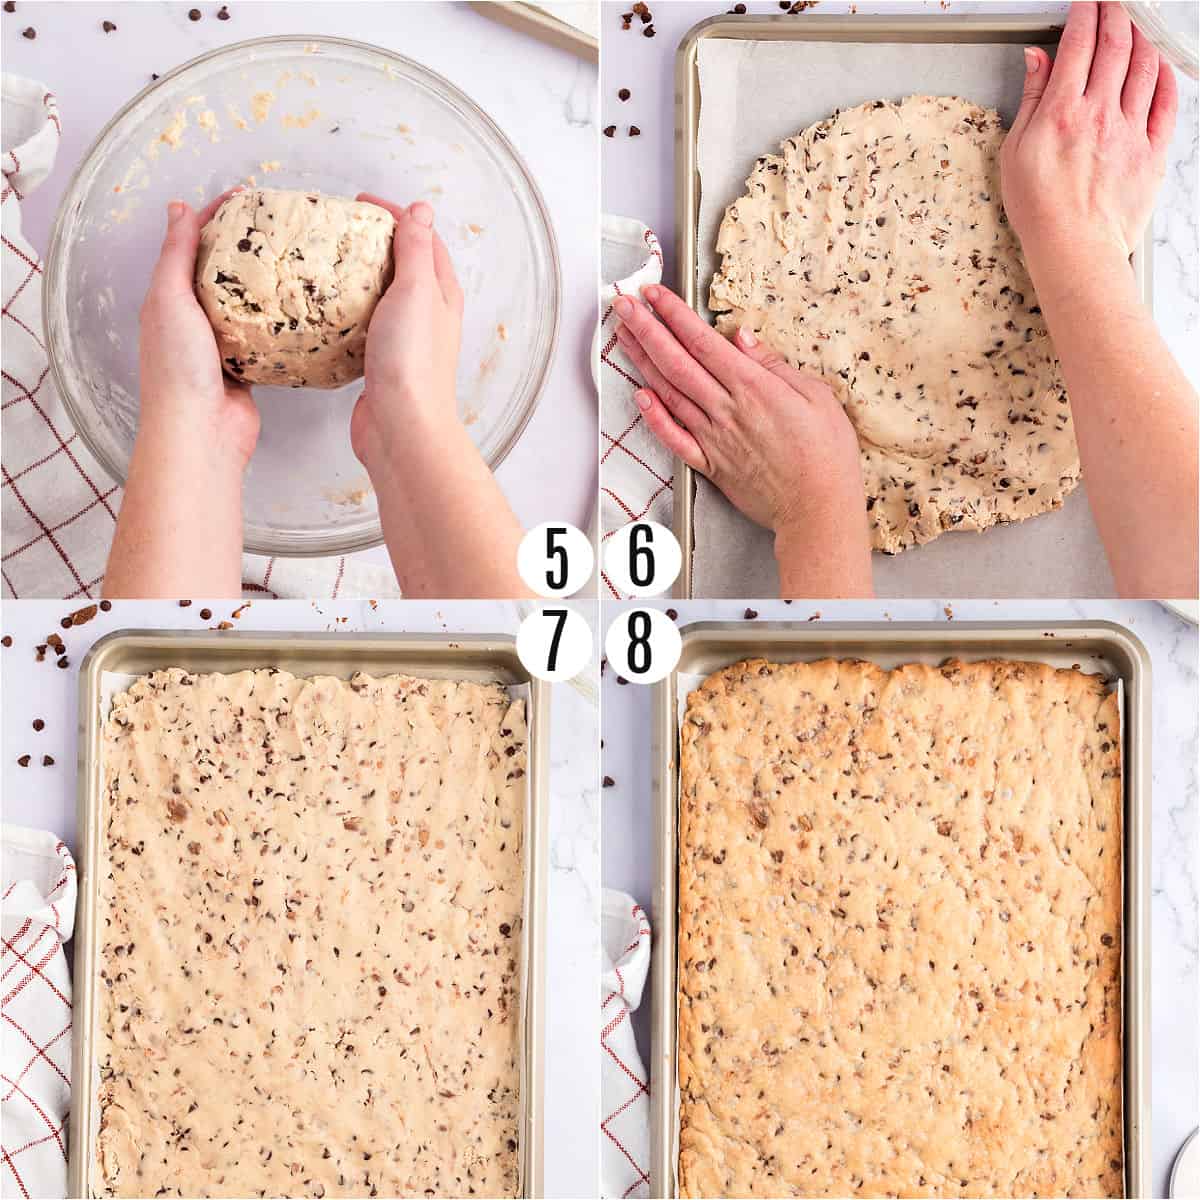 Step by step photos showing how to make shortbread cookie bars.